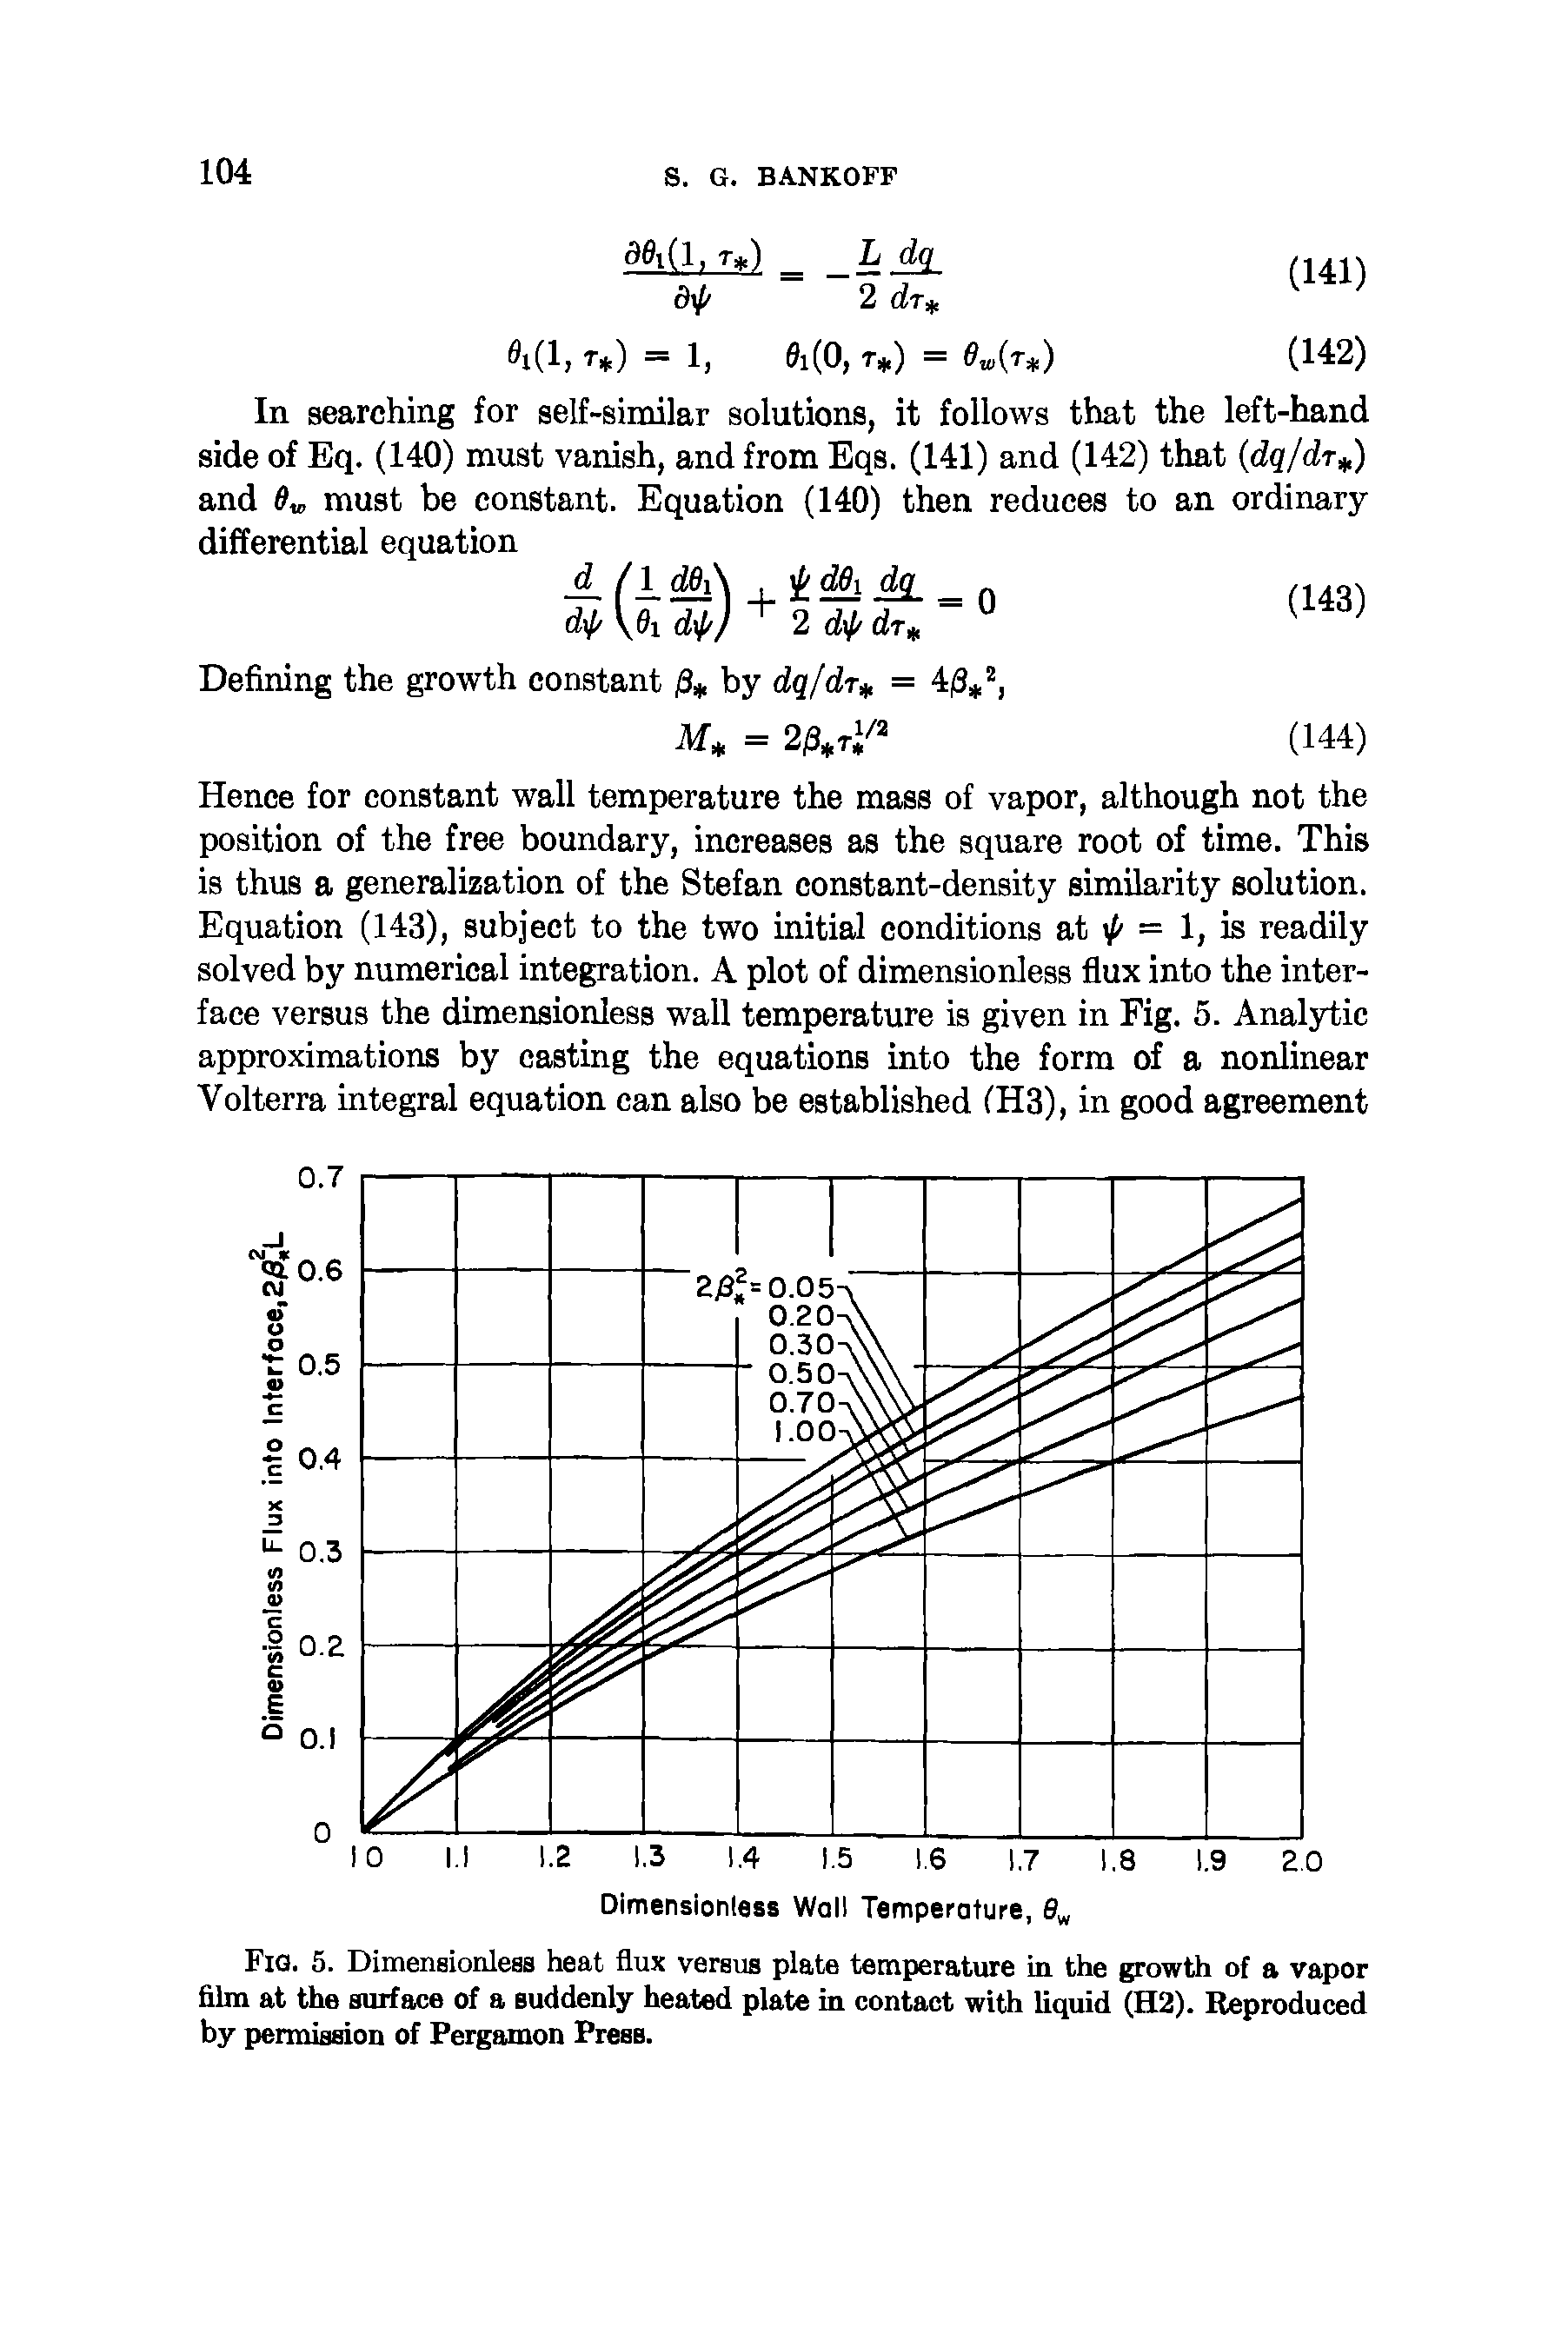 Fig. 5. Dimensionless heat flux versus plate temperature in the growth of a vapor film at the surface of a suddenly heated plate in contact with liquid (H2). Reproduced by permission of Pergamon Press.